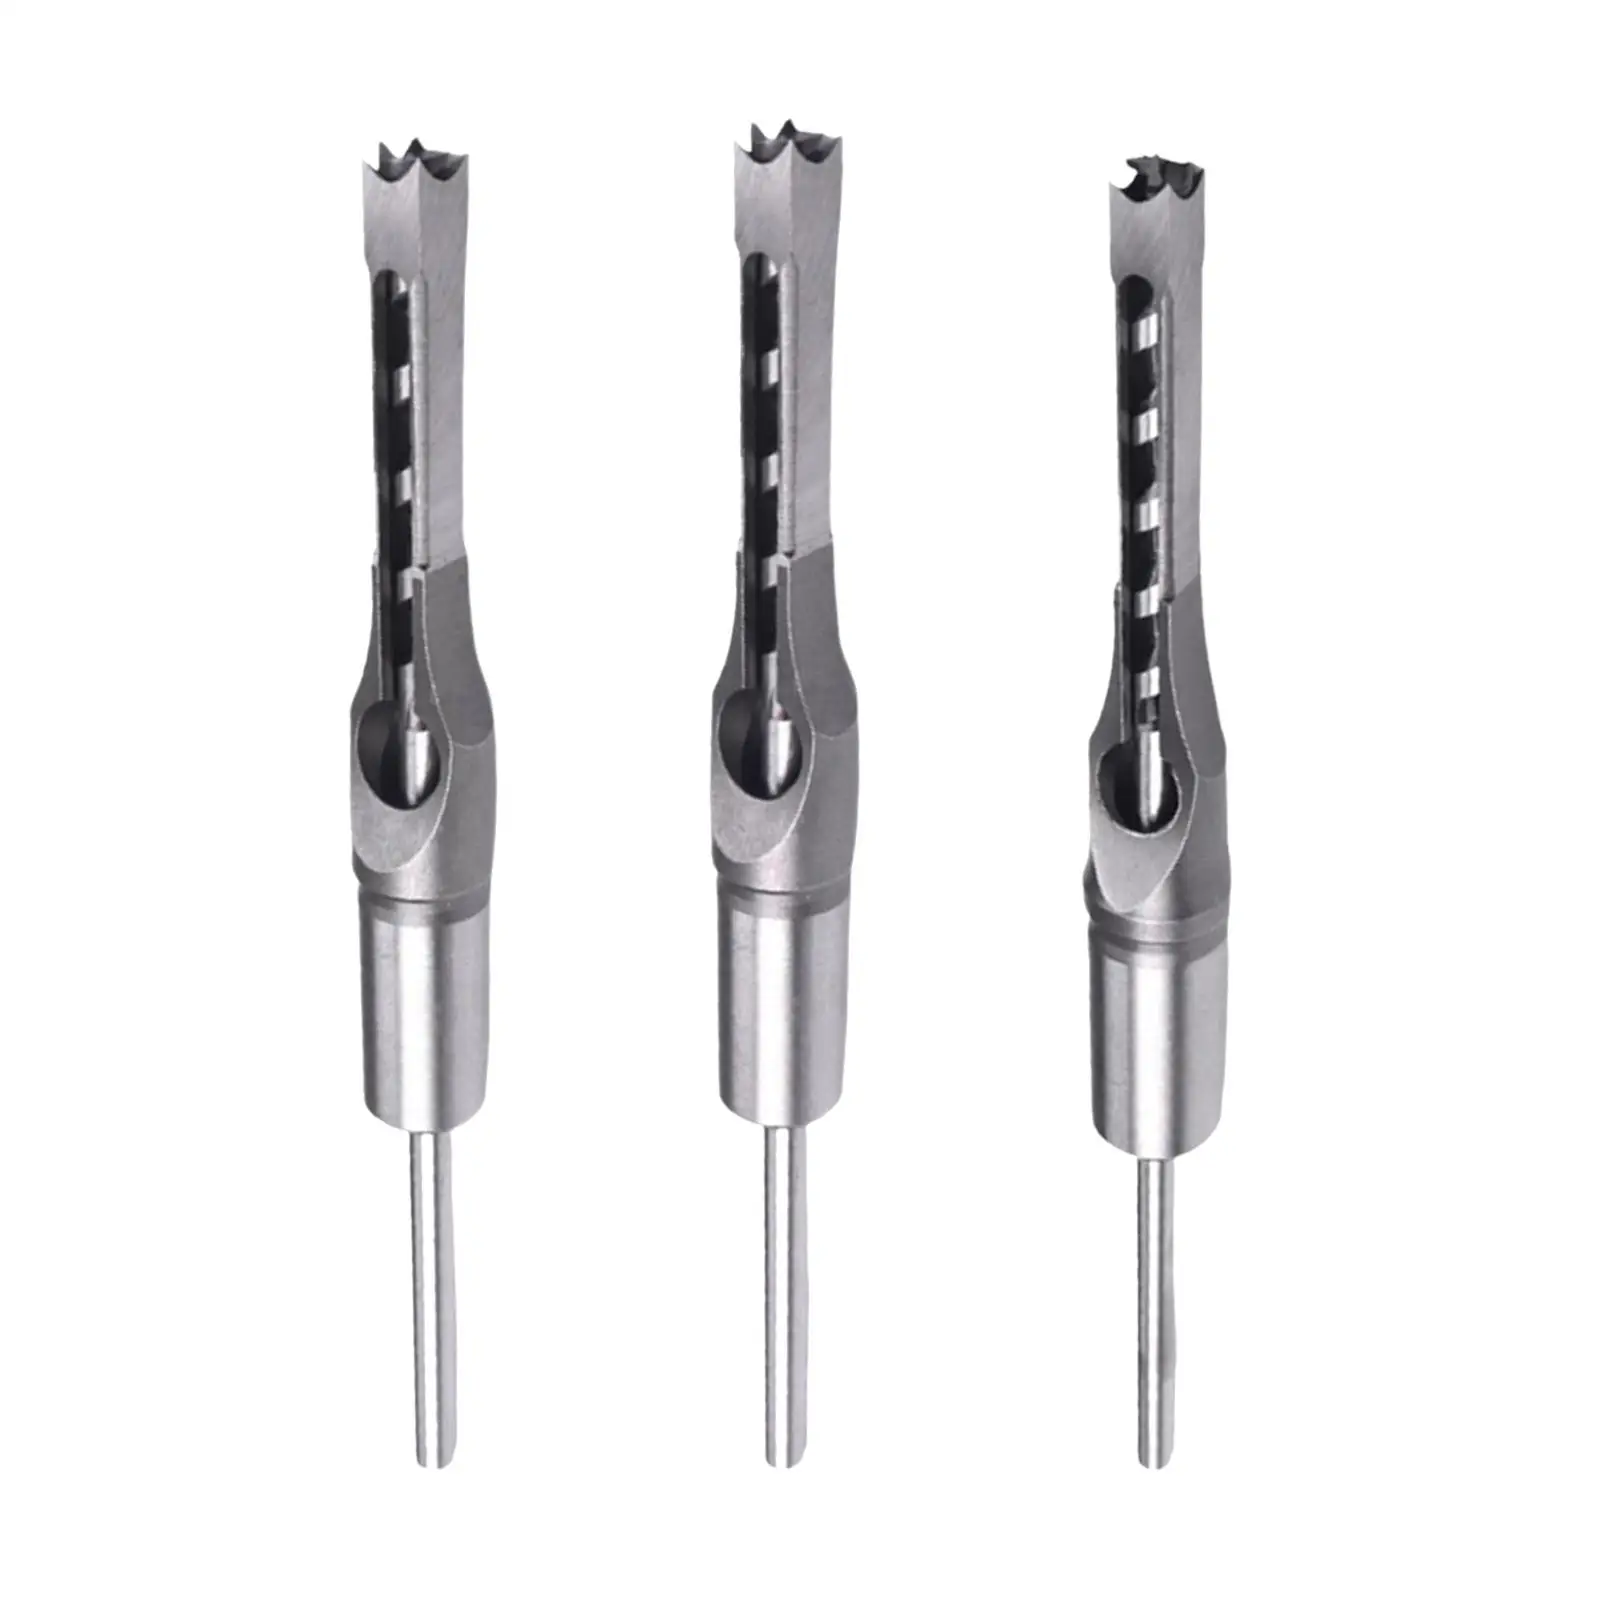 Woodworking Mortising Chisels for DIY Woodworking Carpenter Drilling Tools